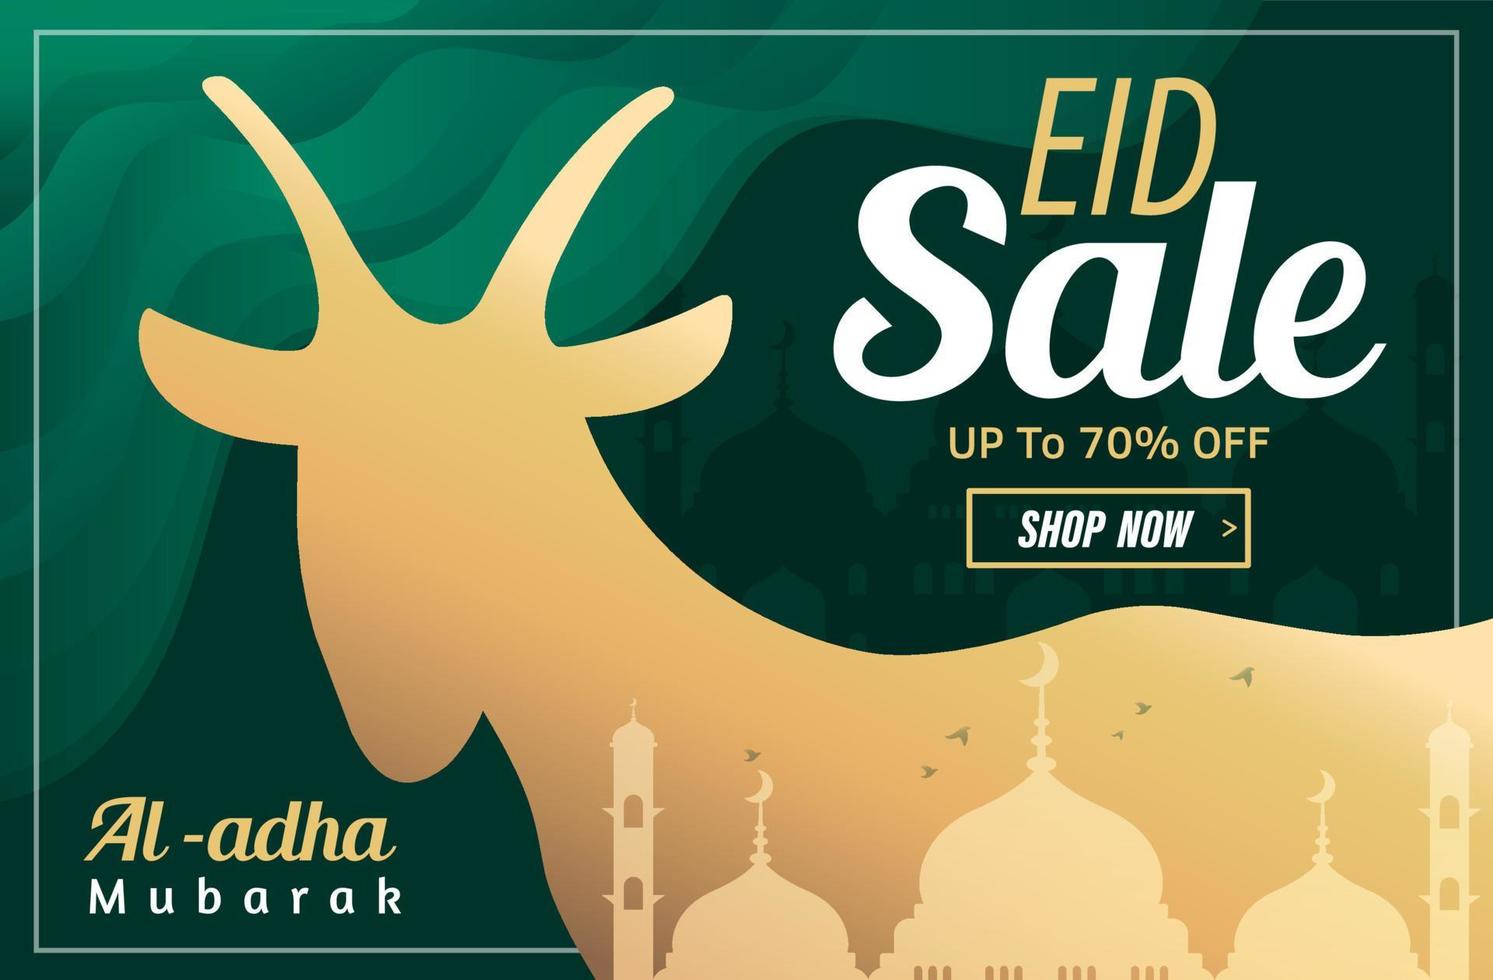 Eid Al-Adha Sale Template Design Promo. Holy Day for Muslims and Islam. Vector Illustration for Sale. the Sacrifice of a Ram. Suitable for Posters, Banners, Web Campaigns, and Greeting Cards.